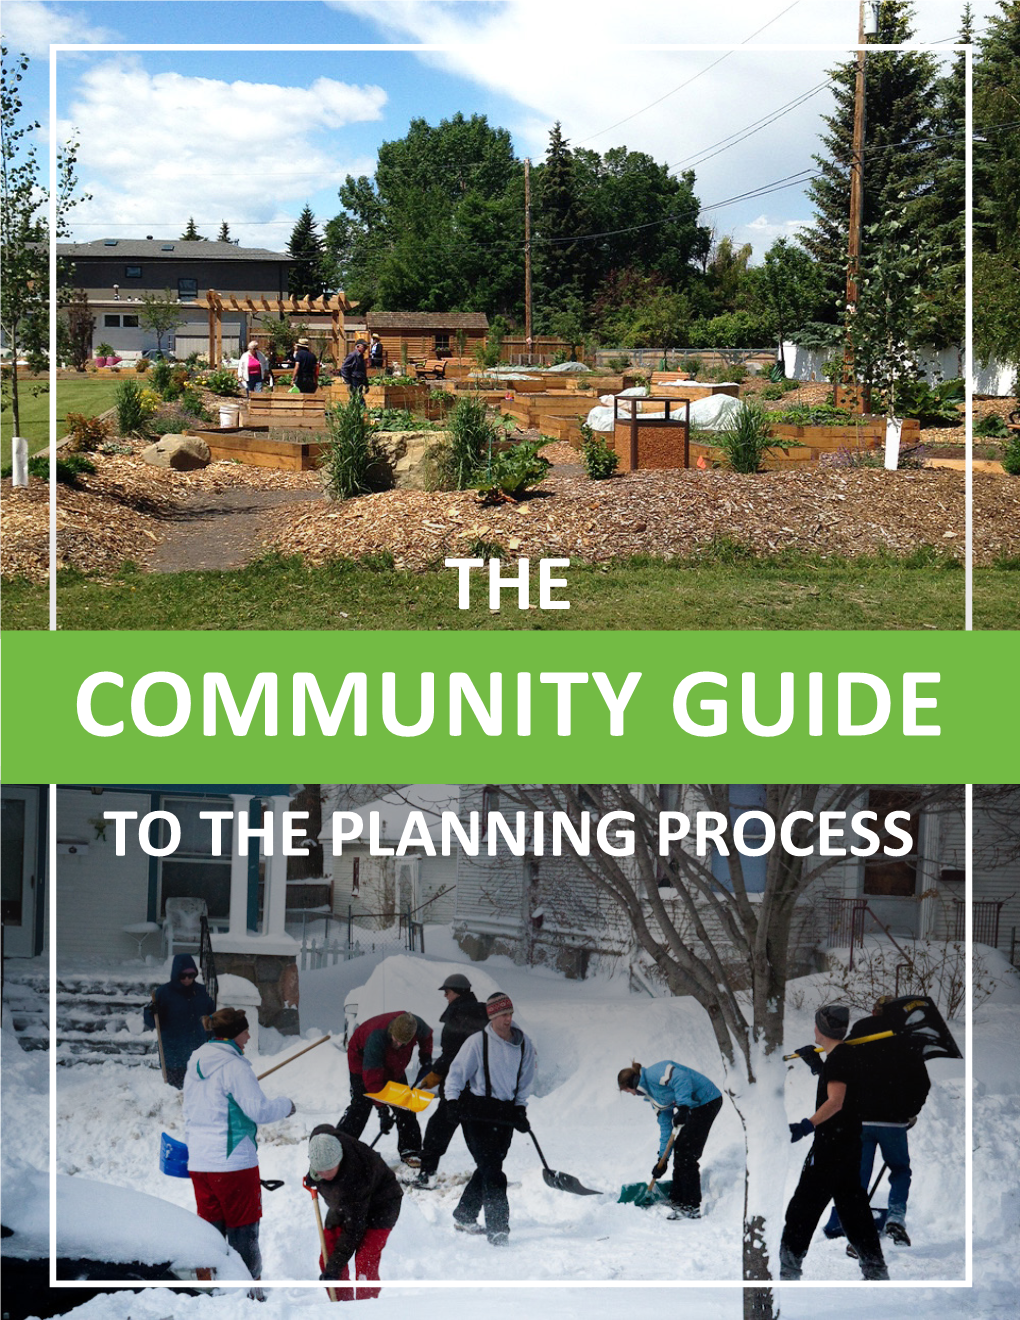 THE COMMUNITY GUIDE to the PLANNING PROCESS the Community Guide to the Planning Process the Community Guide to the Planning Process Credits